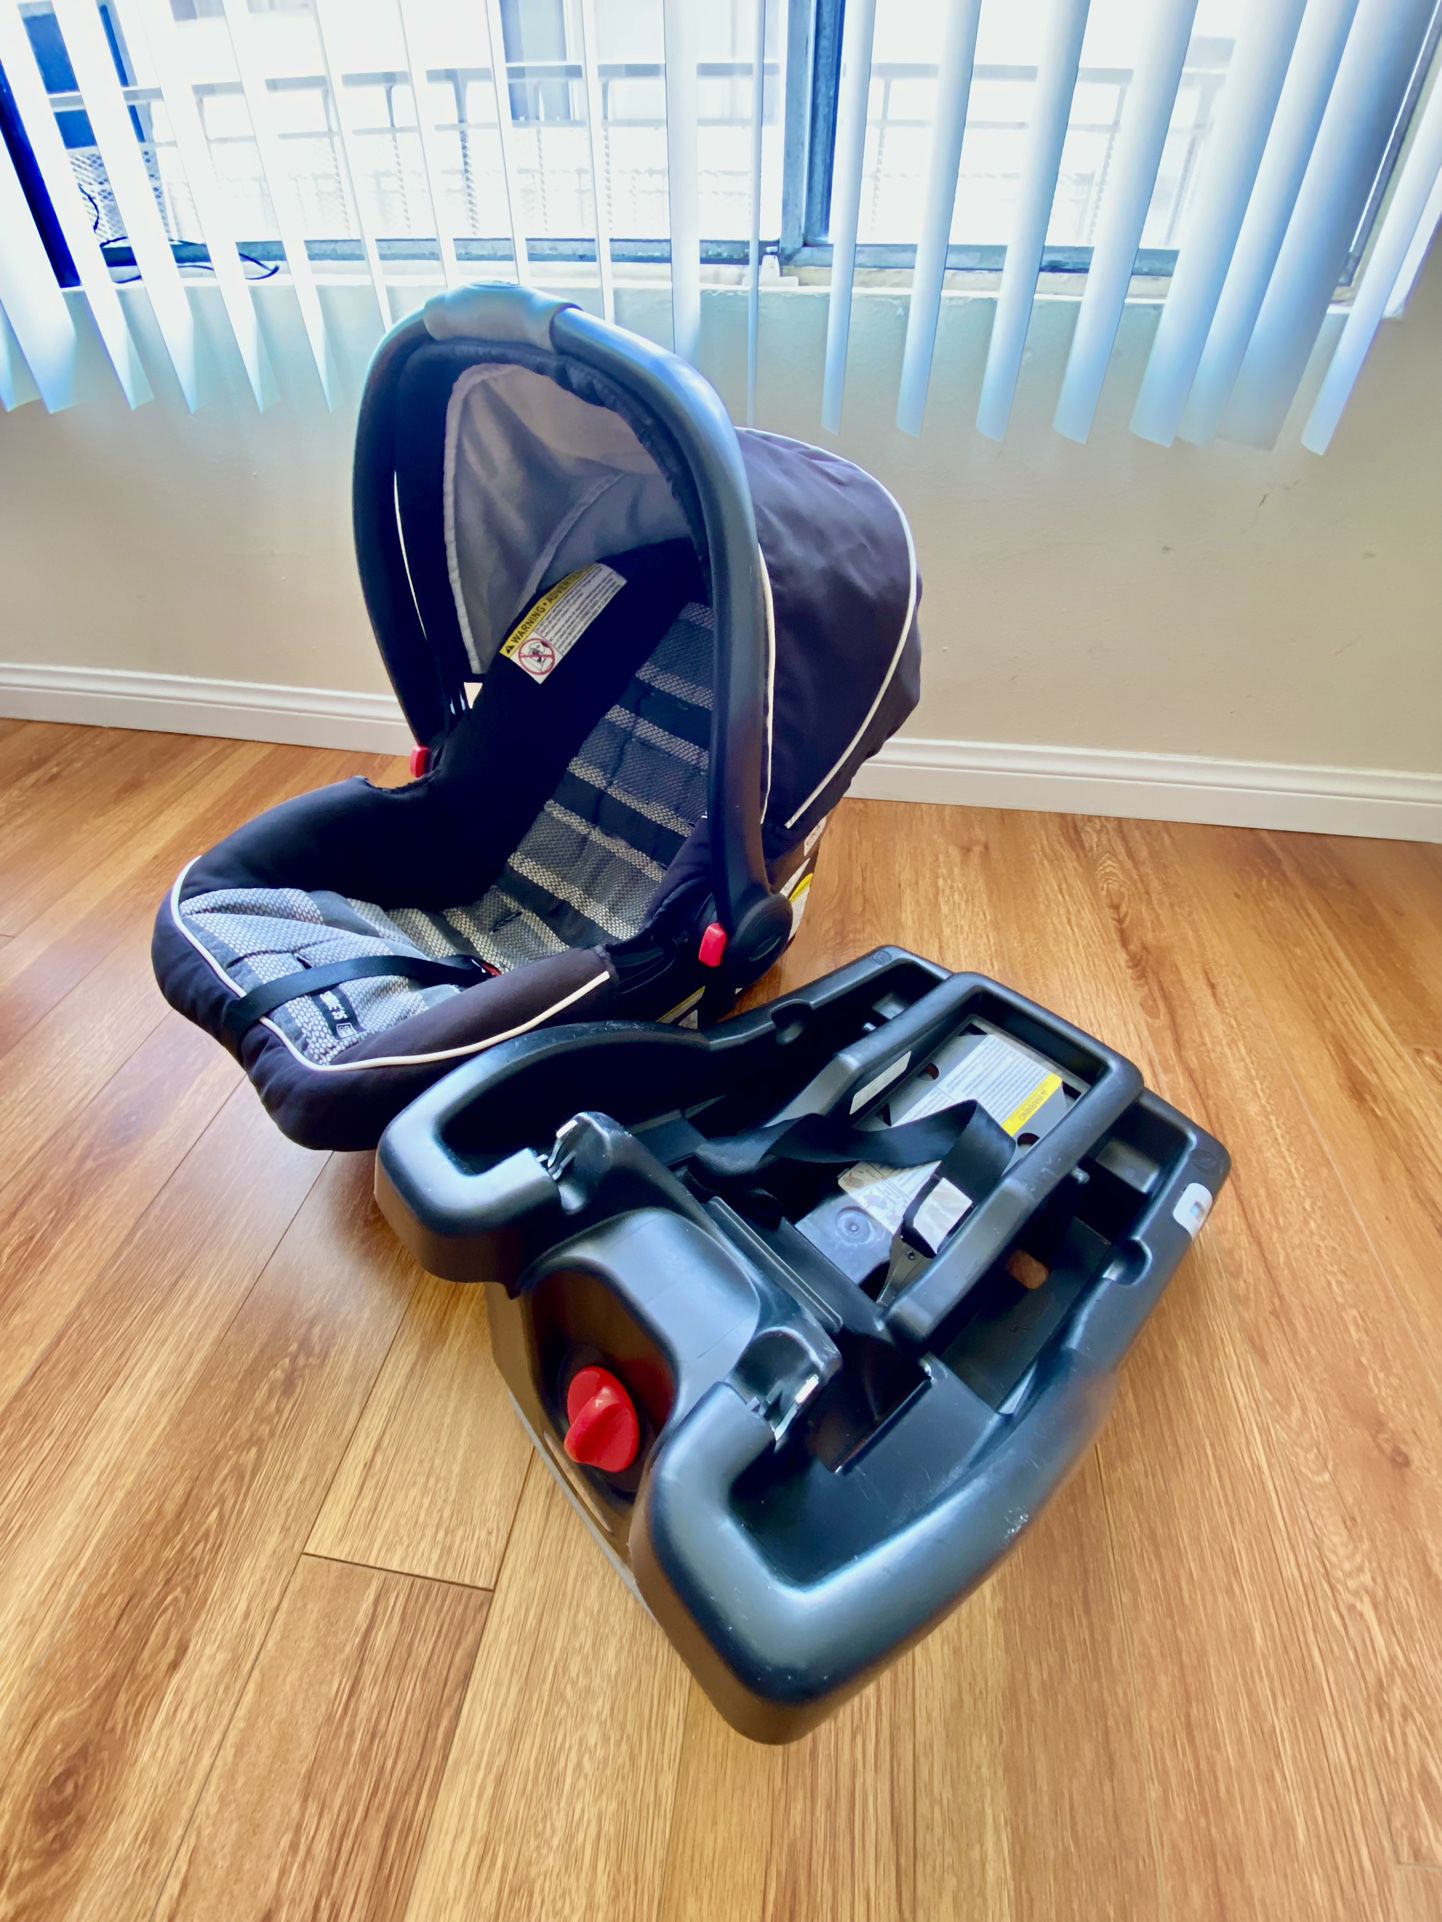 GRACO CAR SEAT - Great Condition - $25